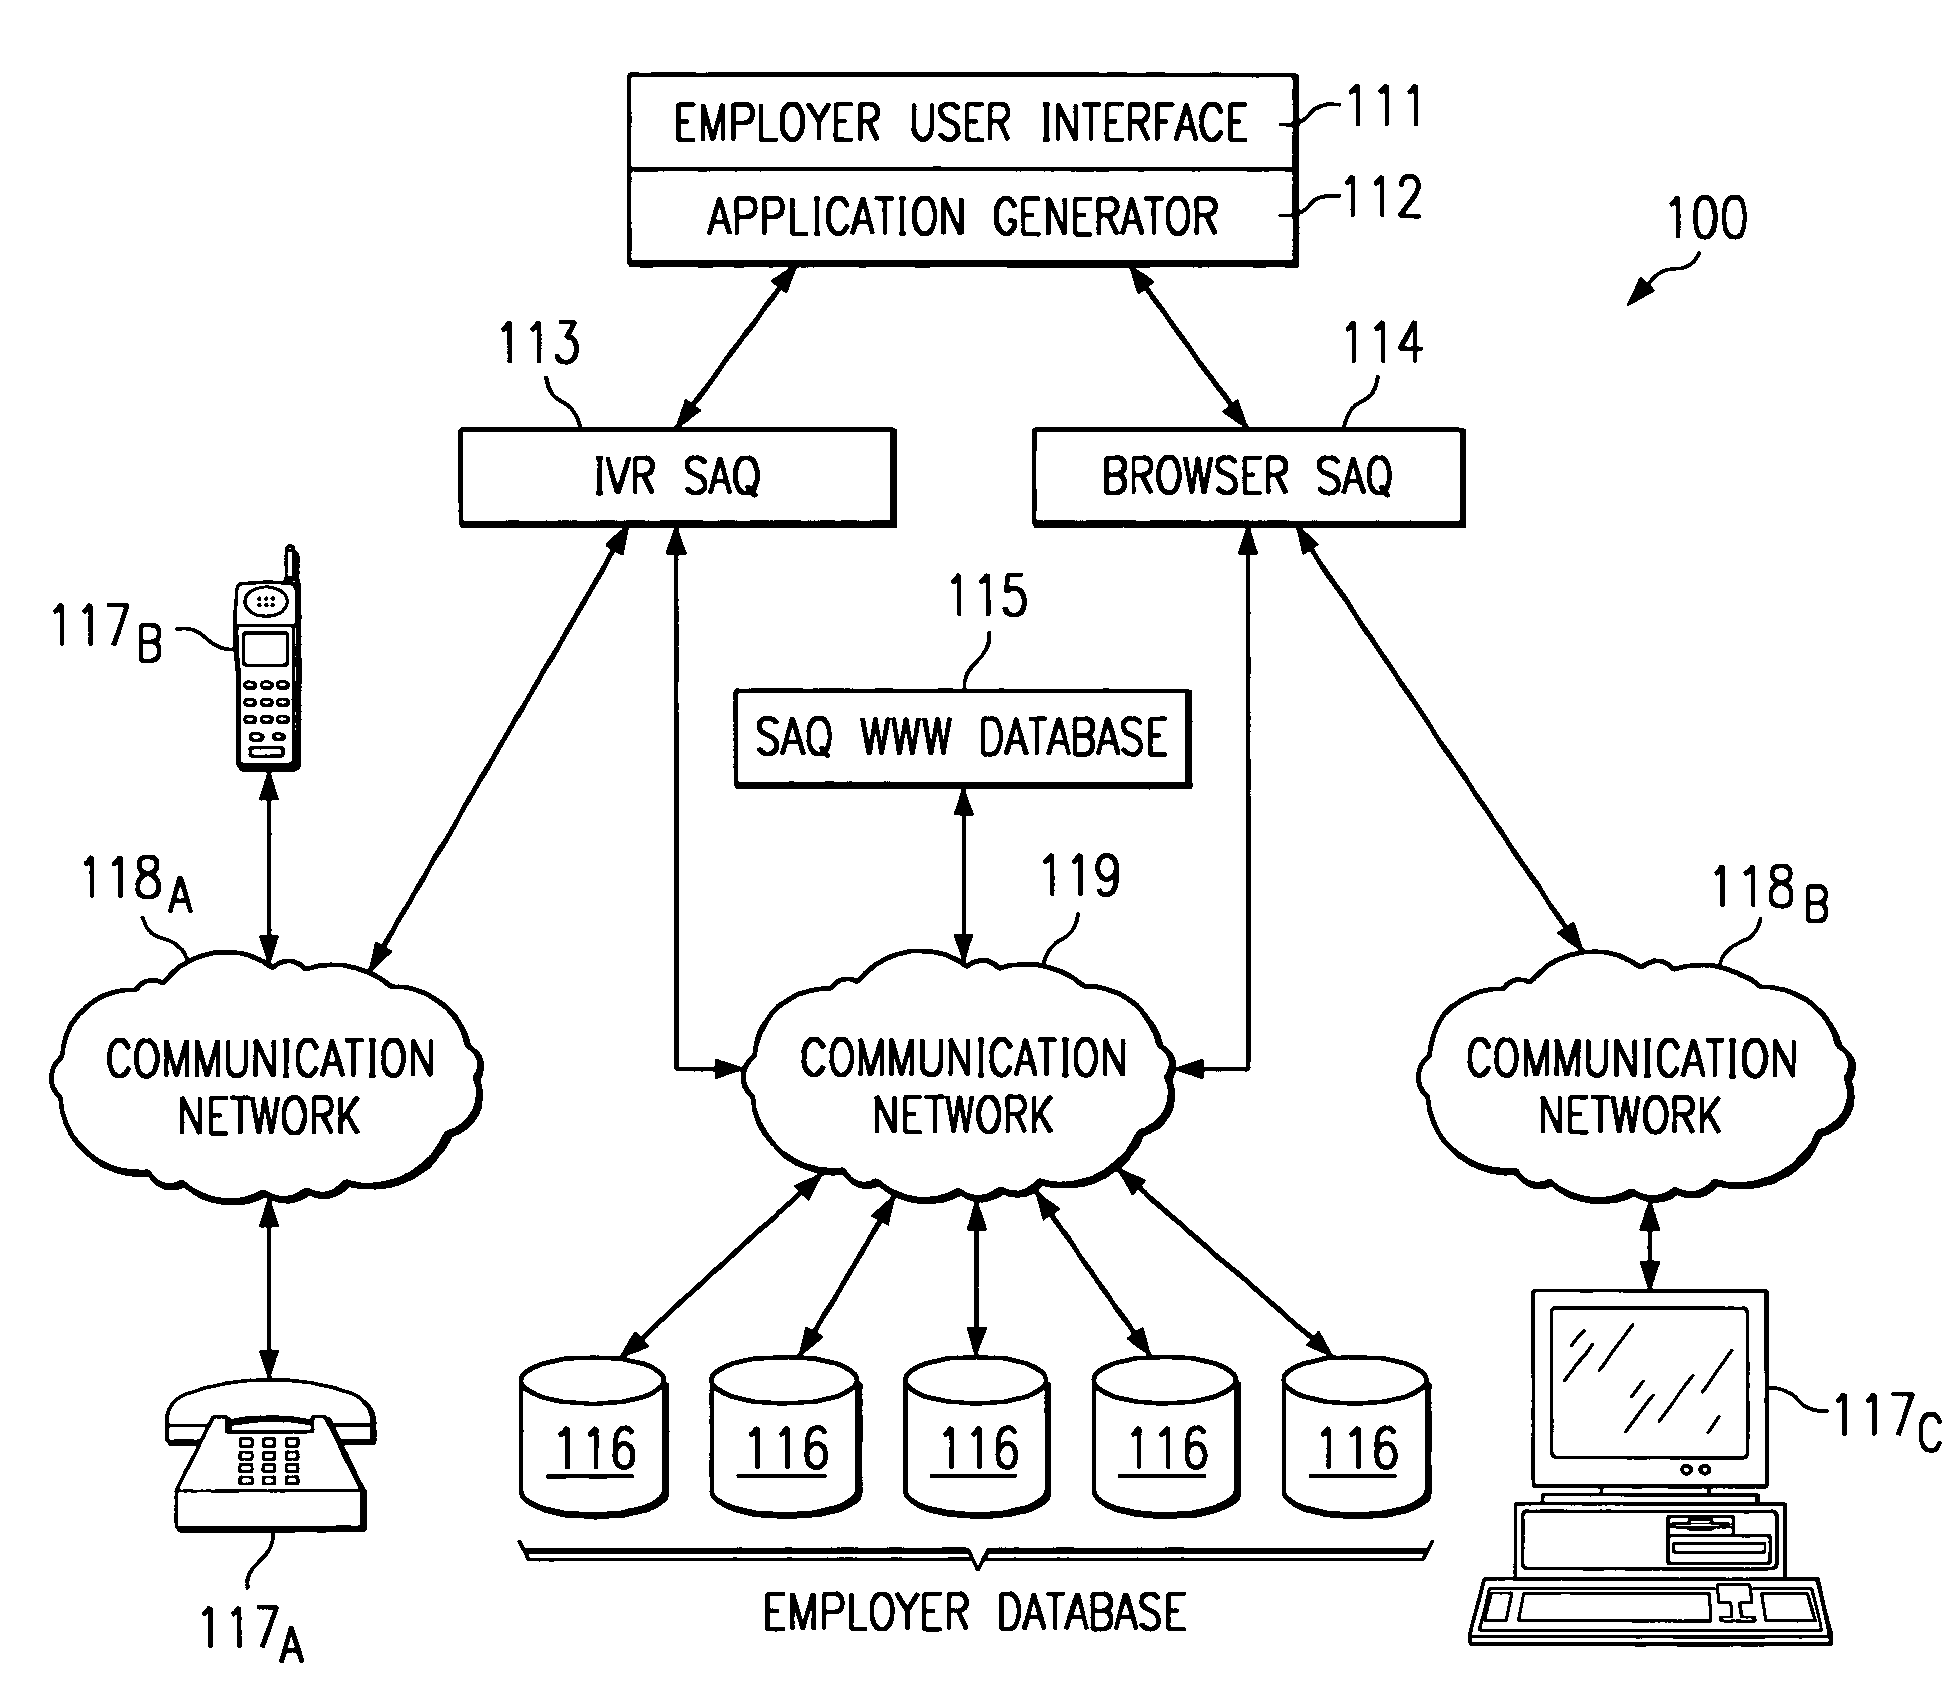 System and method for automated screening and qualification of employment candidates